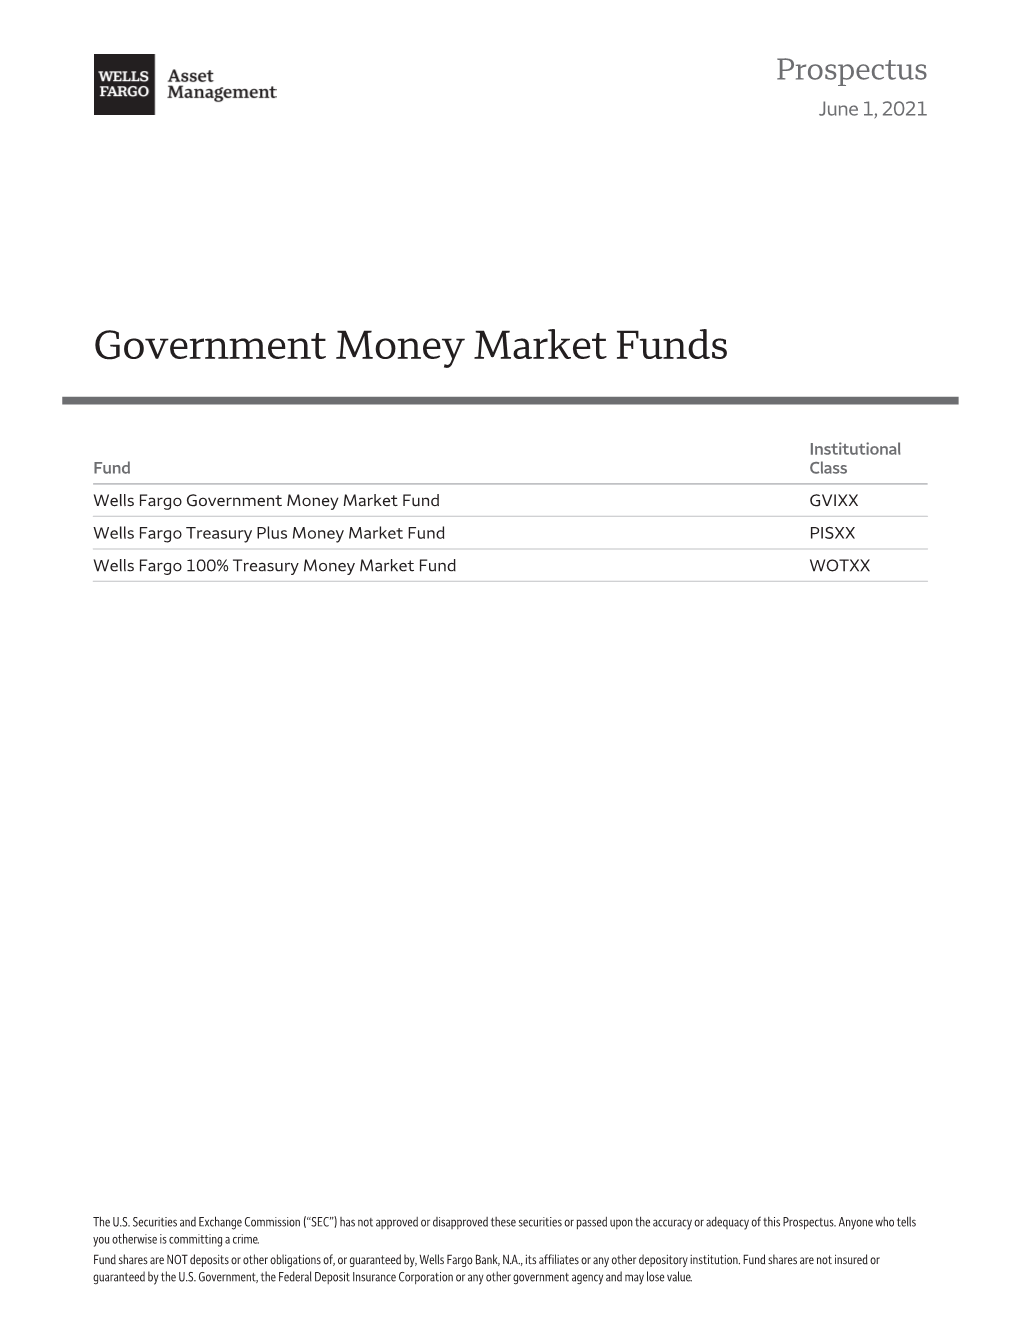 Government Money Market Funds